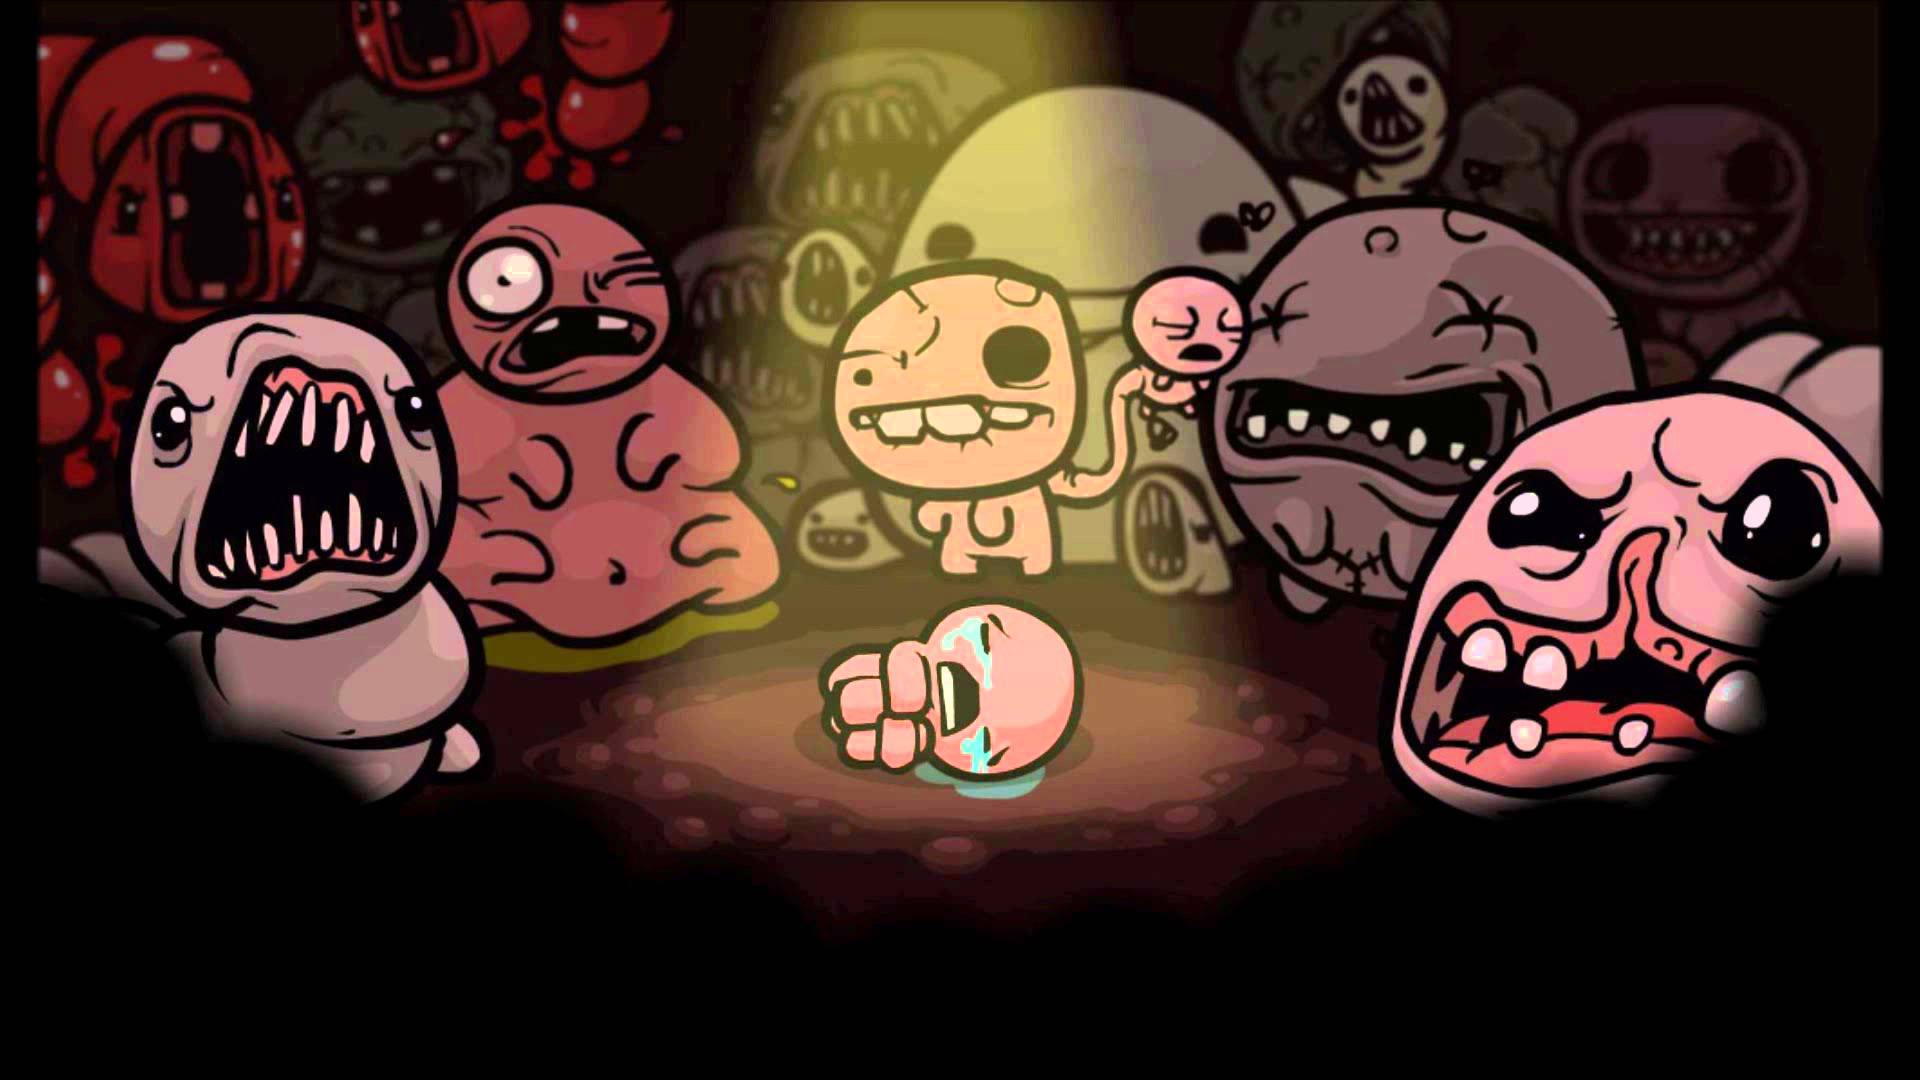 the binding of isaac free download